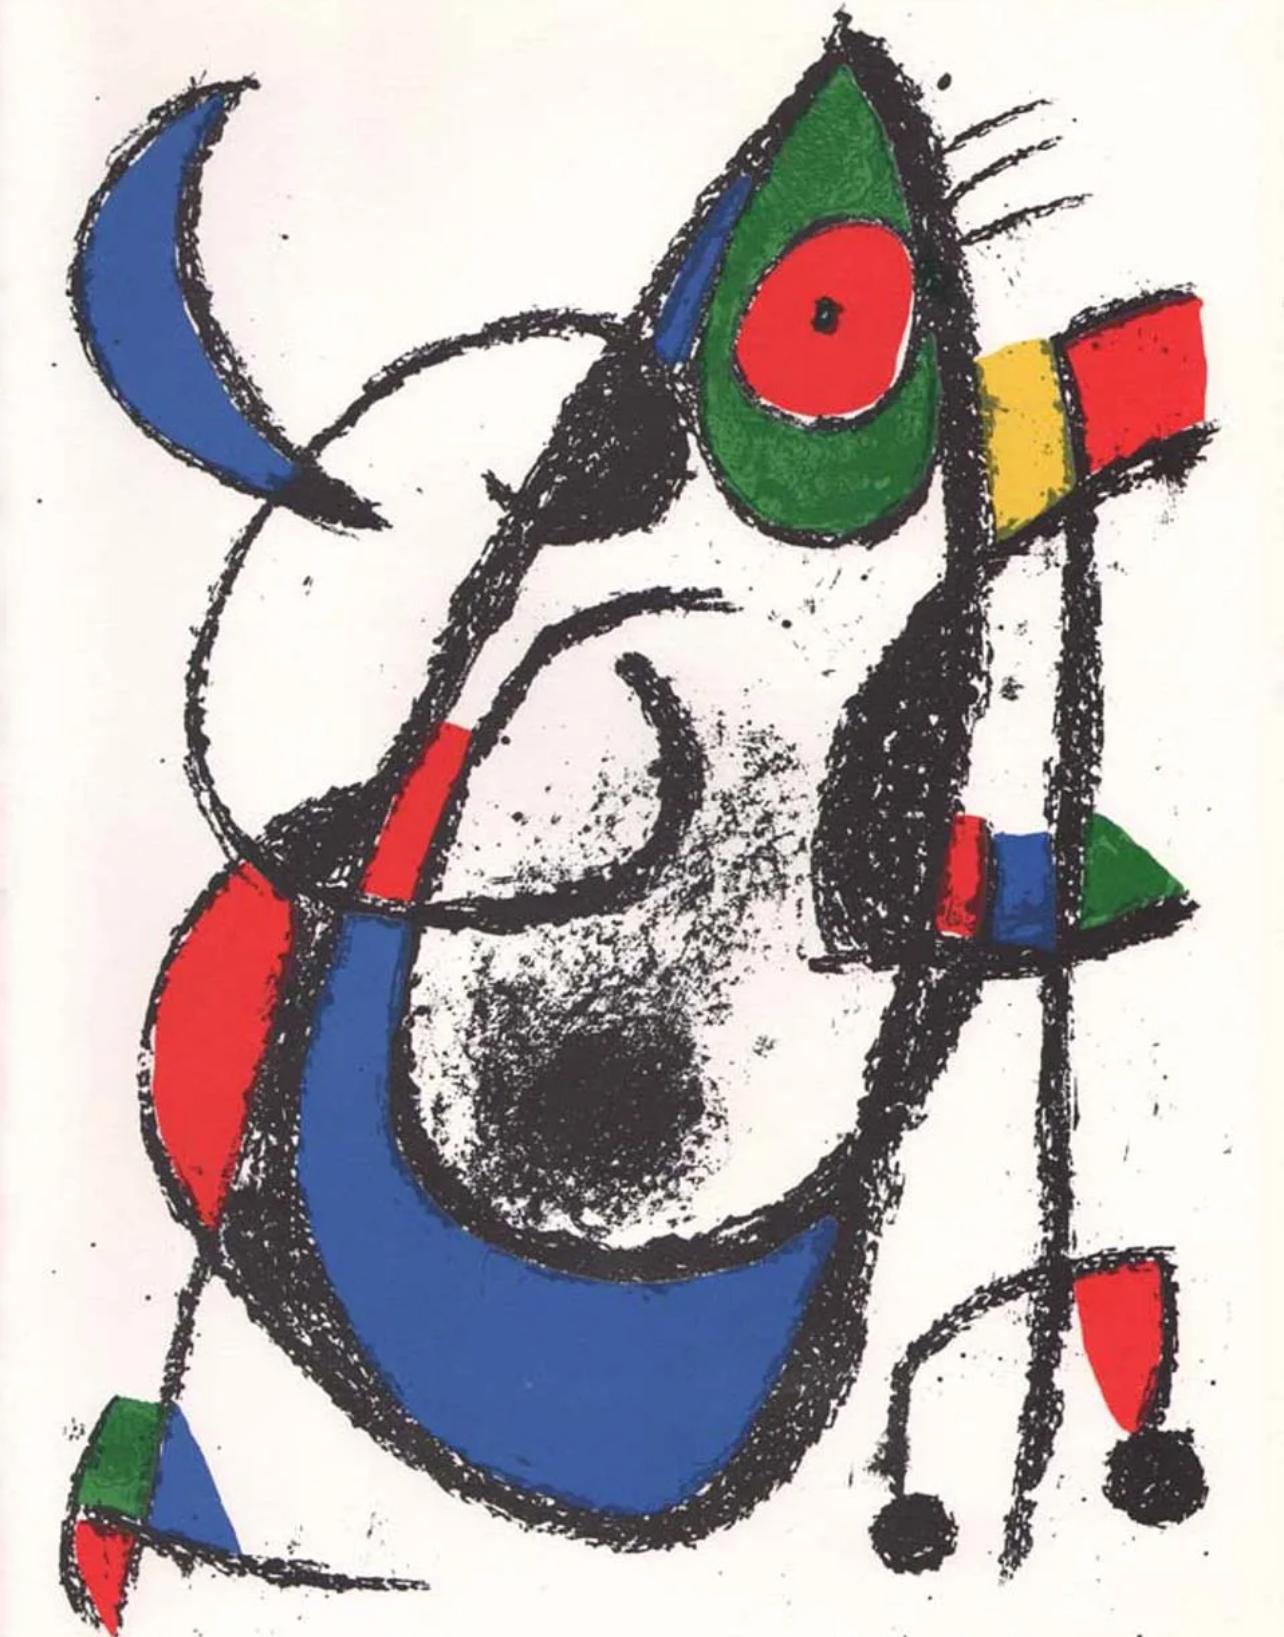 Joan Miró Abstract Print - Miro, Composition (Mourlot 1047), 1975 (after)